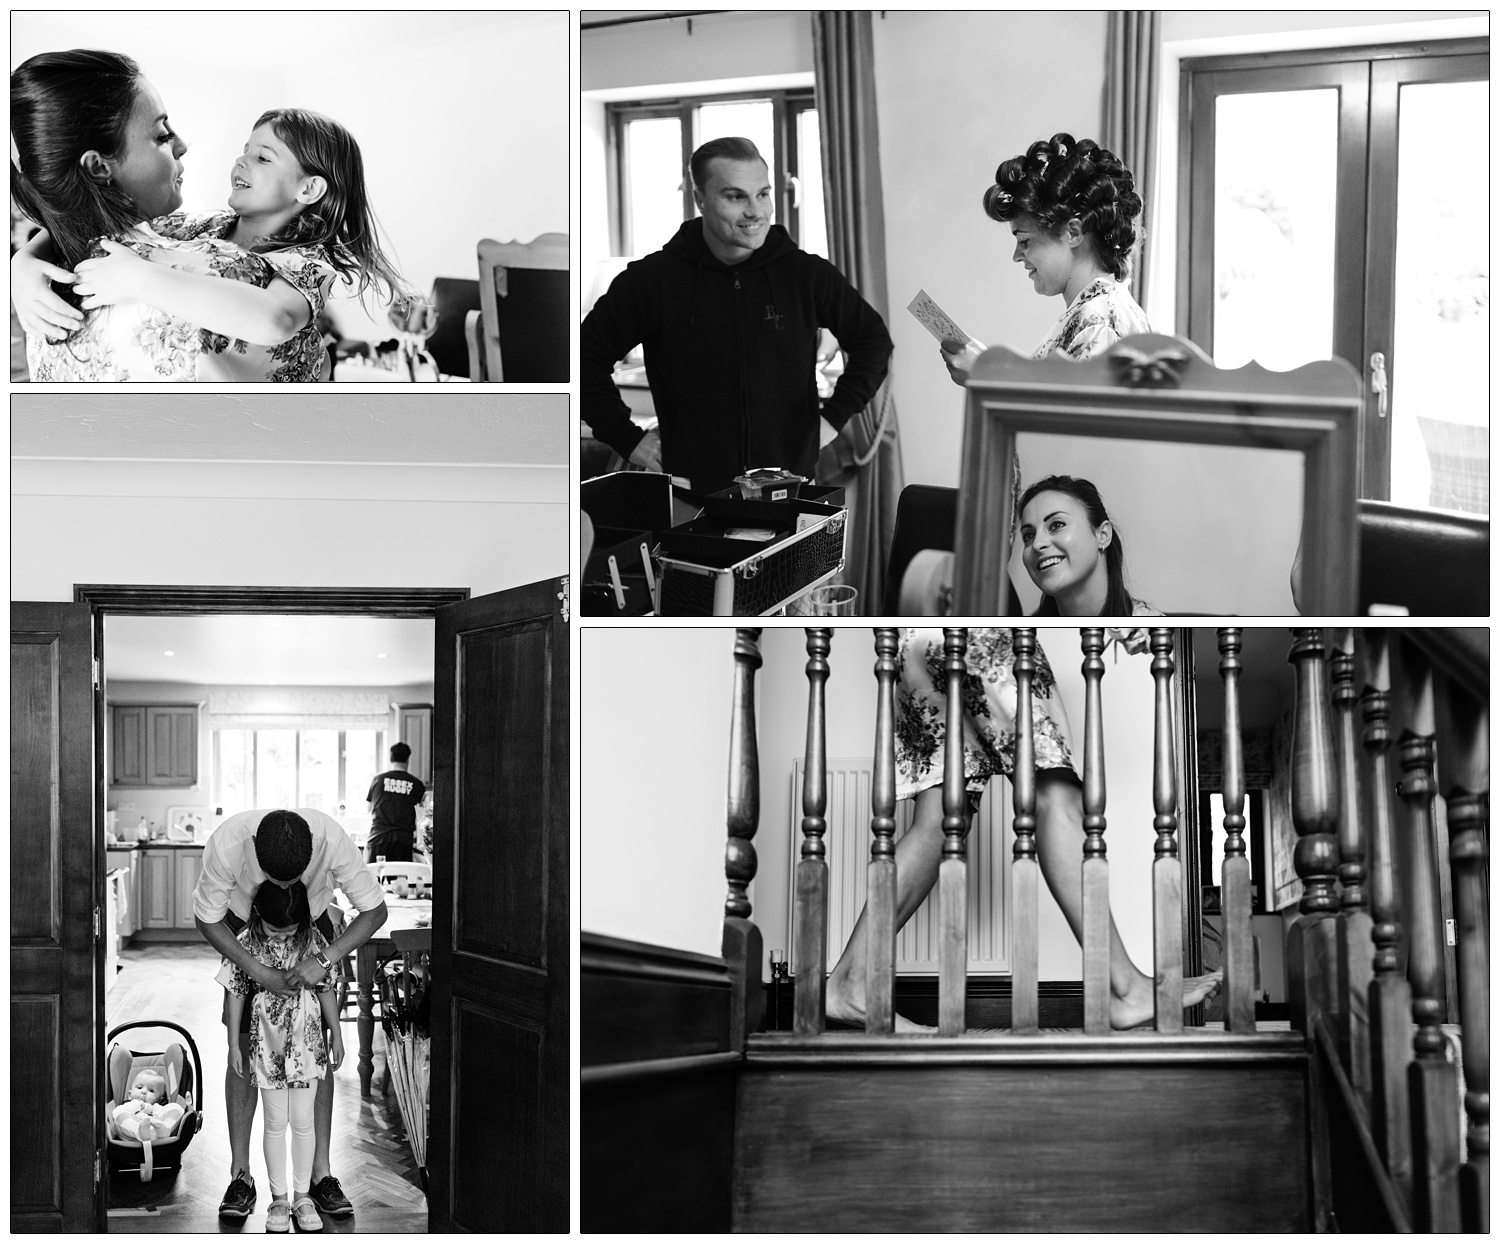 candid photographs in black and white of wedding preparations